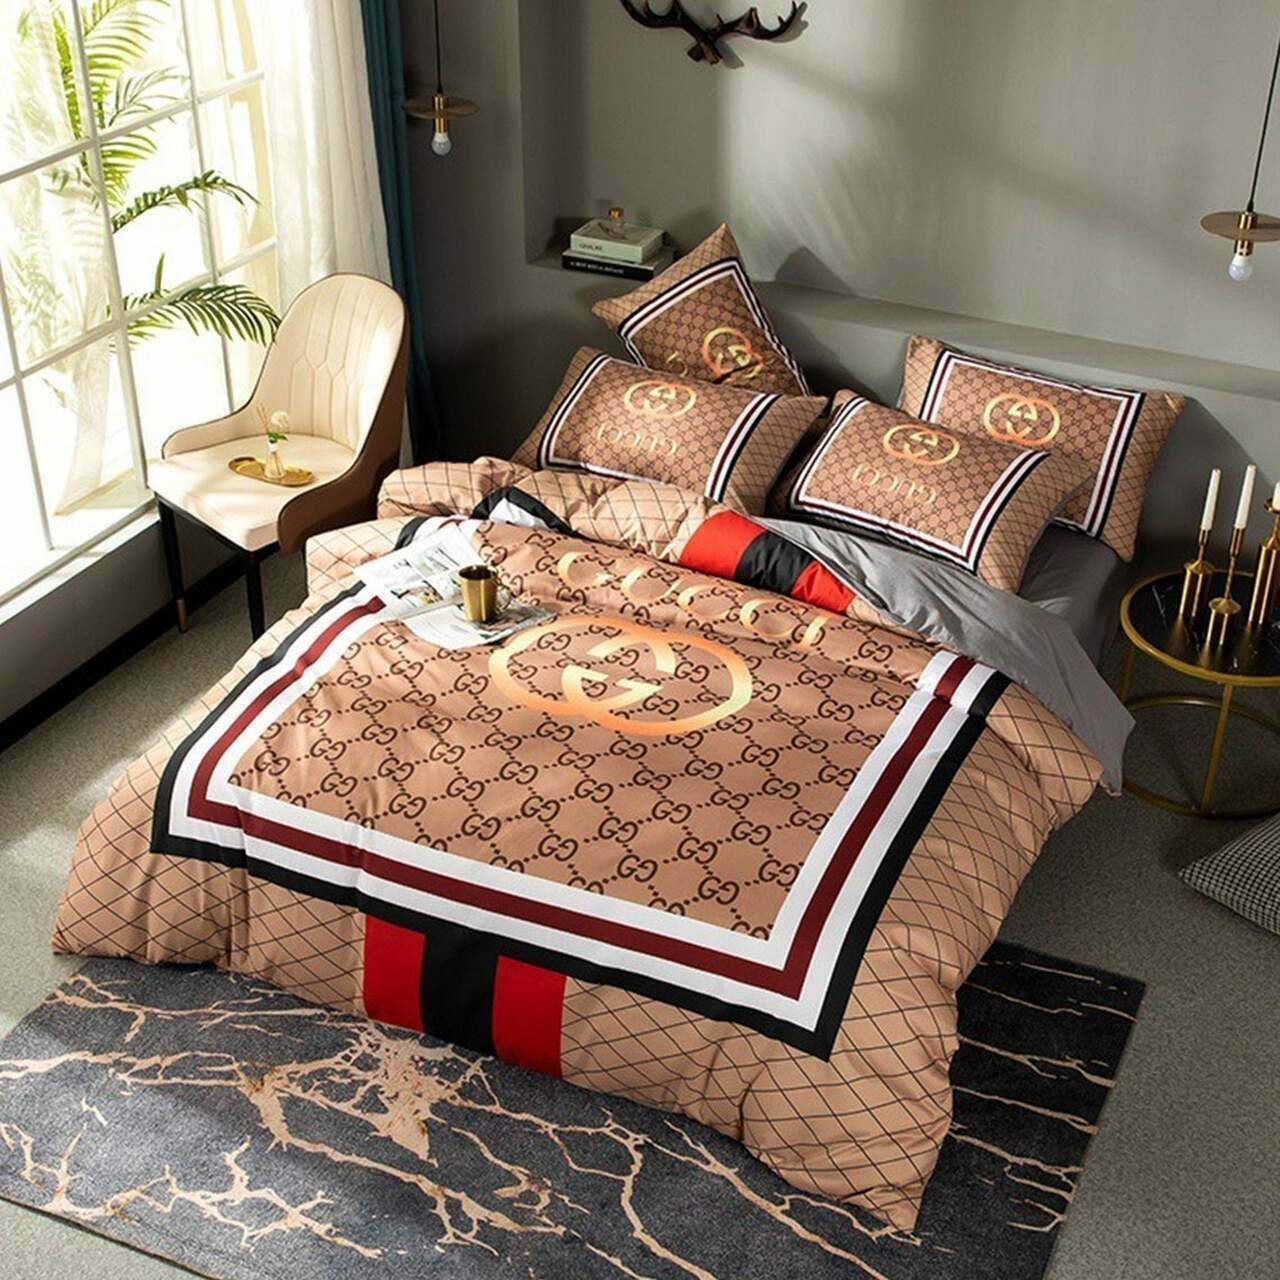 Let me show you about some luxury brand bedding set 2022 27